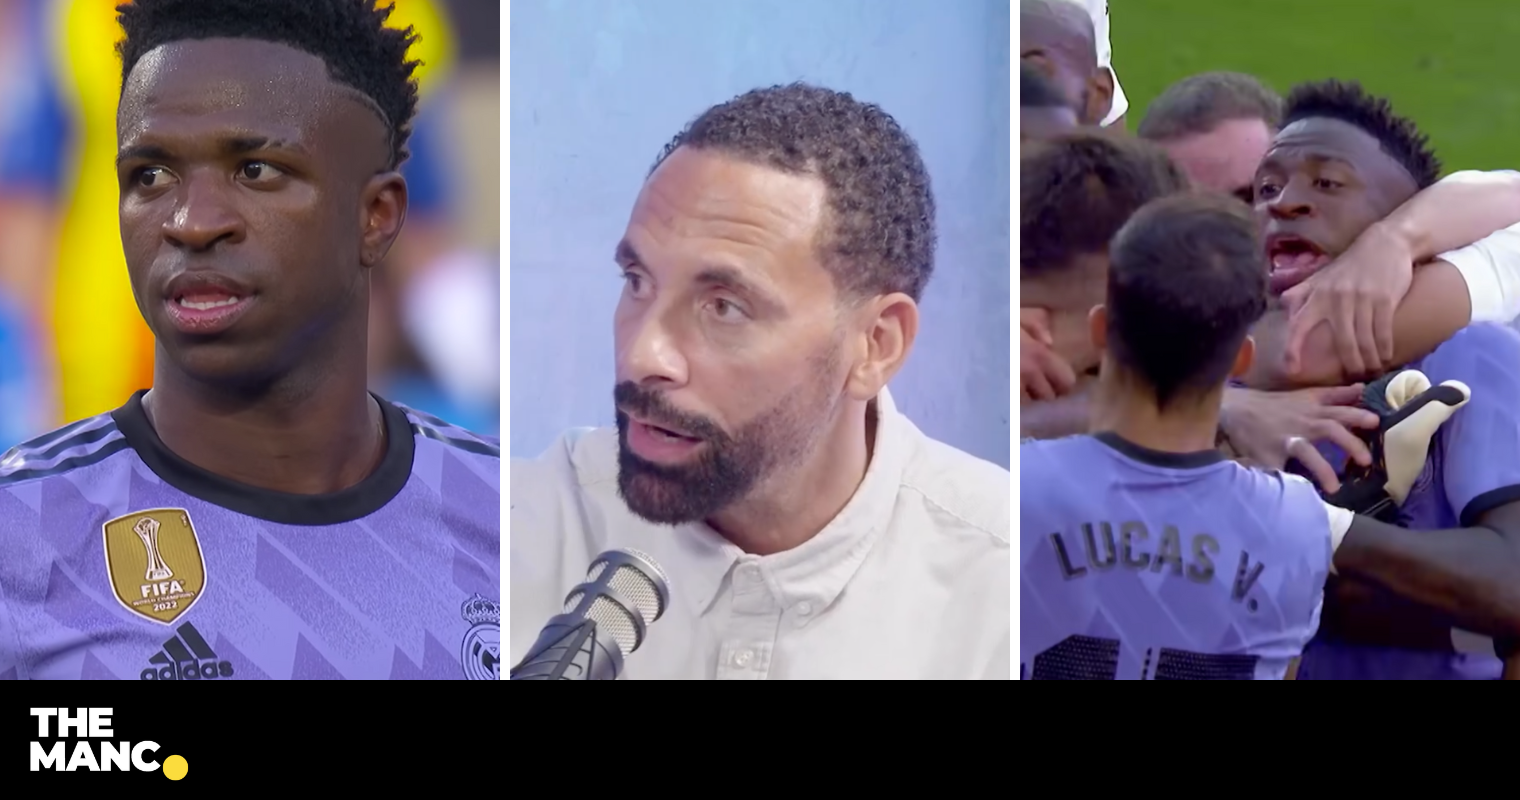 Rio Ferdinand posts defiant message of support after Vinicius Jr suffers racist abuse